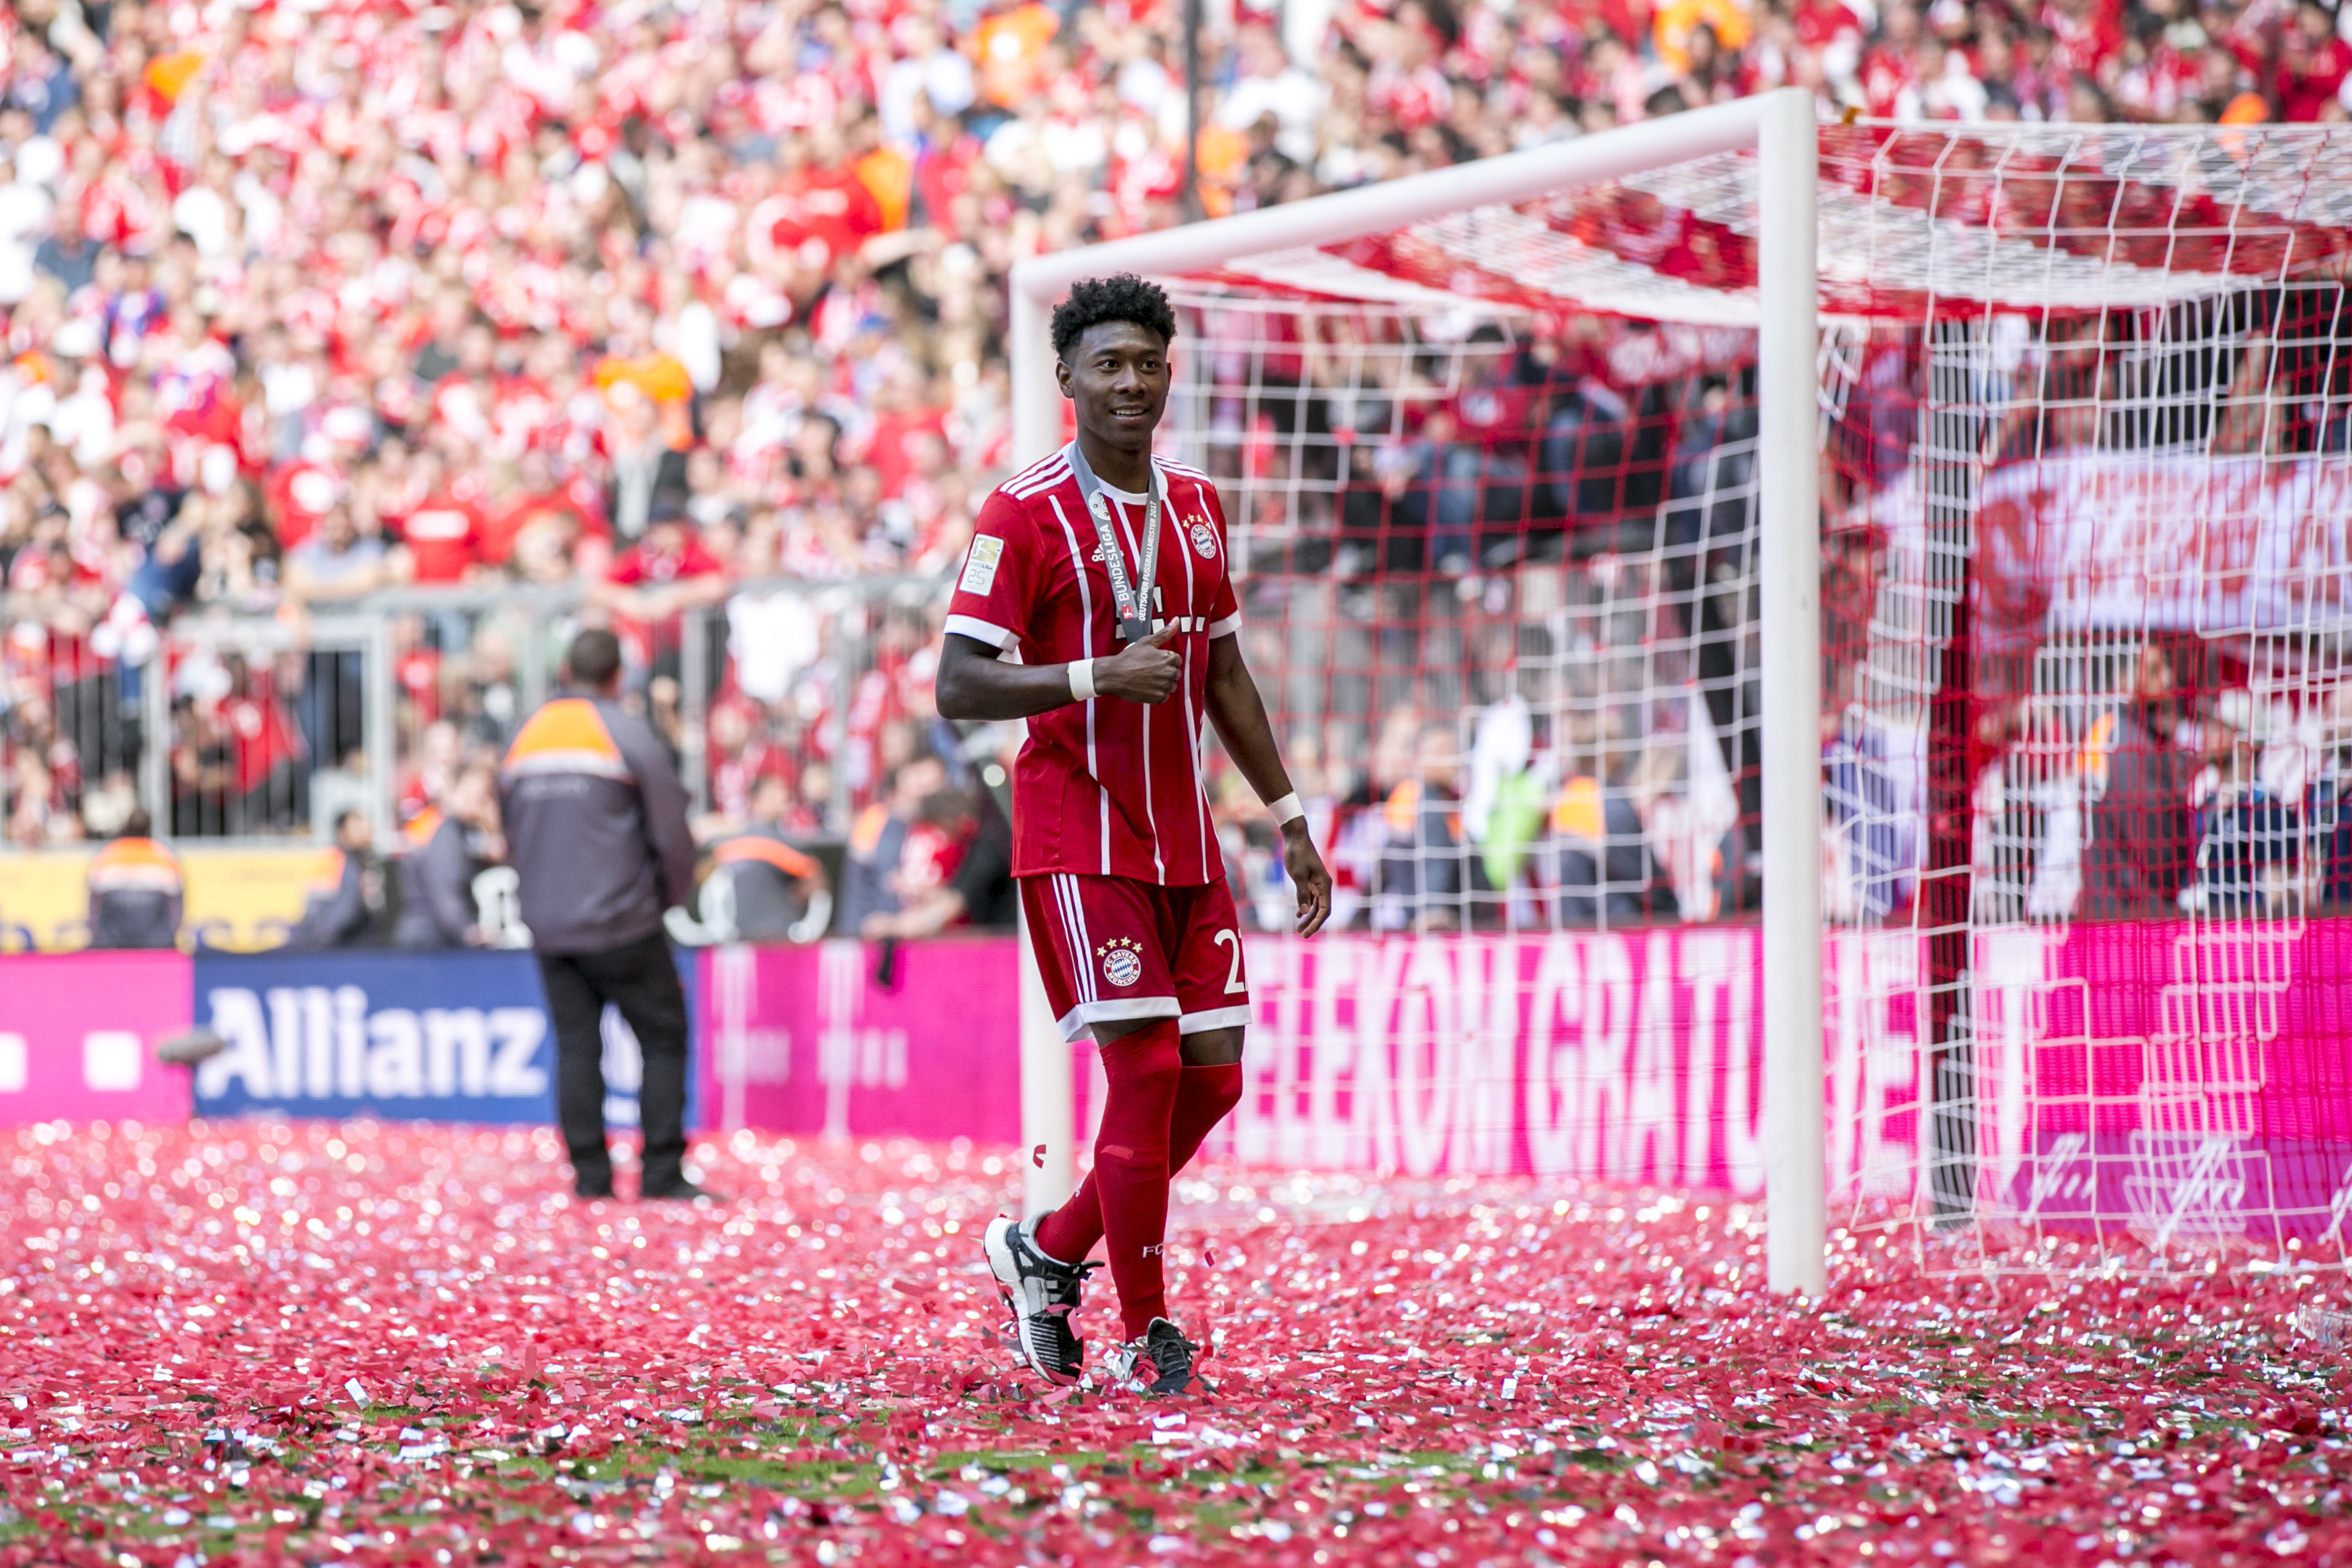 MUNICH, GERMANY - MAY 20: David Alaba of FC Bayern Muenchen is seen following the Bundesliga match between Bayern Muenchen and SC Freiburg at Allianz Arena on May 20, 2017 in Munich, Germany. (Photo by Jan Hetfleisch/Getty Images for MAN)